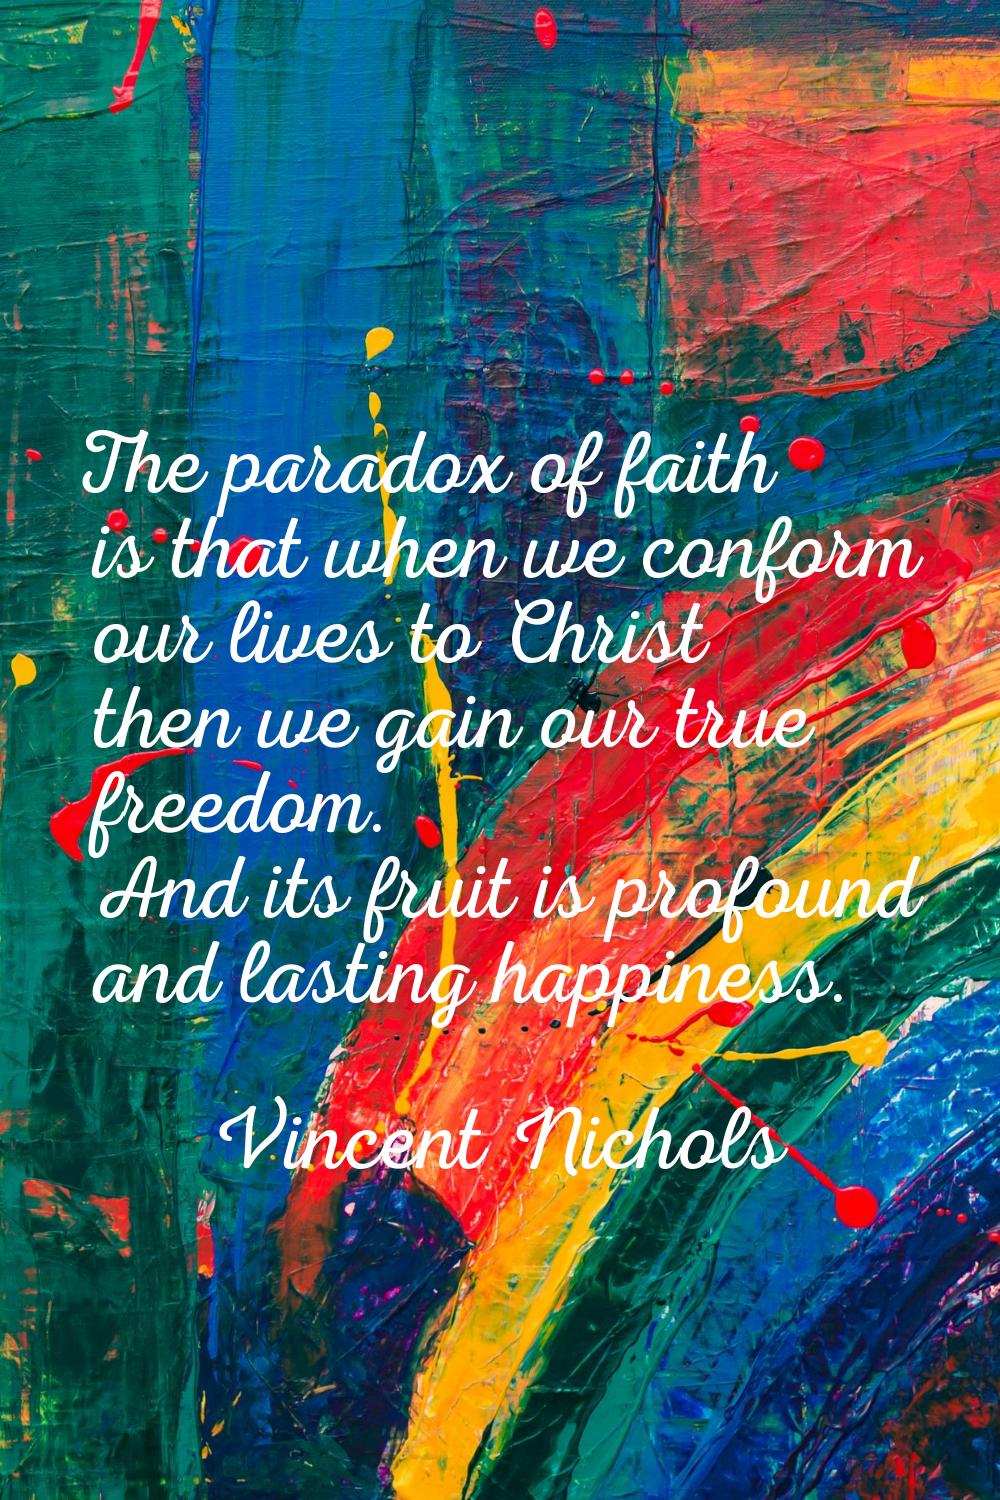 The paradox of faith is that when we conform our lives to Christ then we gain our true freedom. And